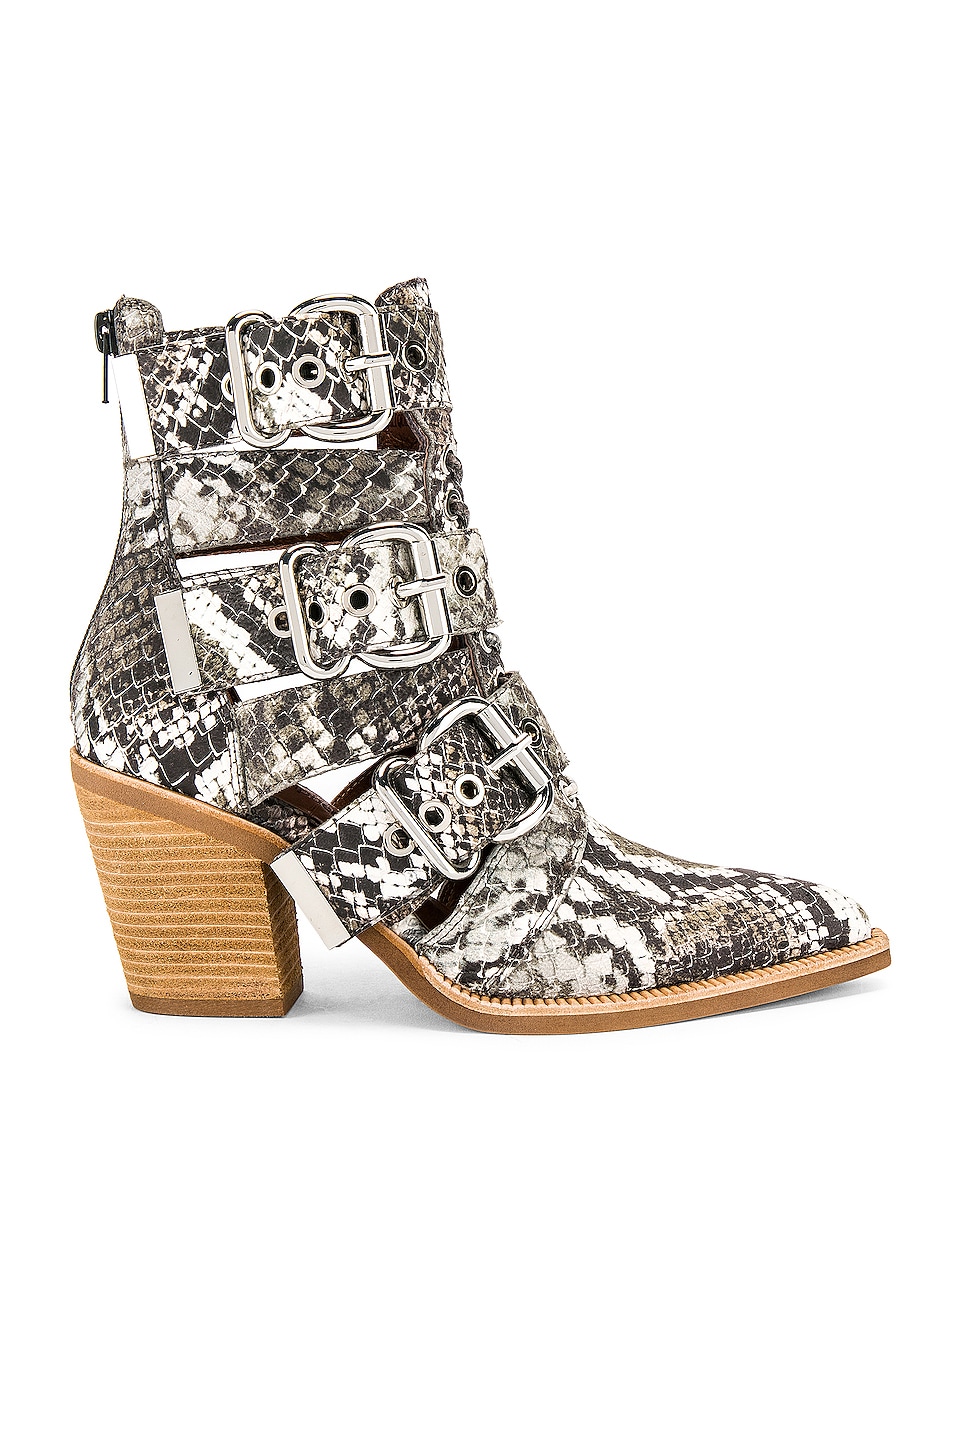 Jeffrey Campbell Caceres Bootie in Brown & Grey Snake | REVOLVE